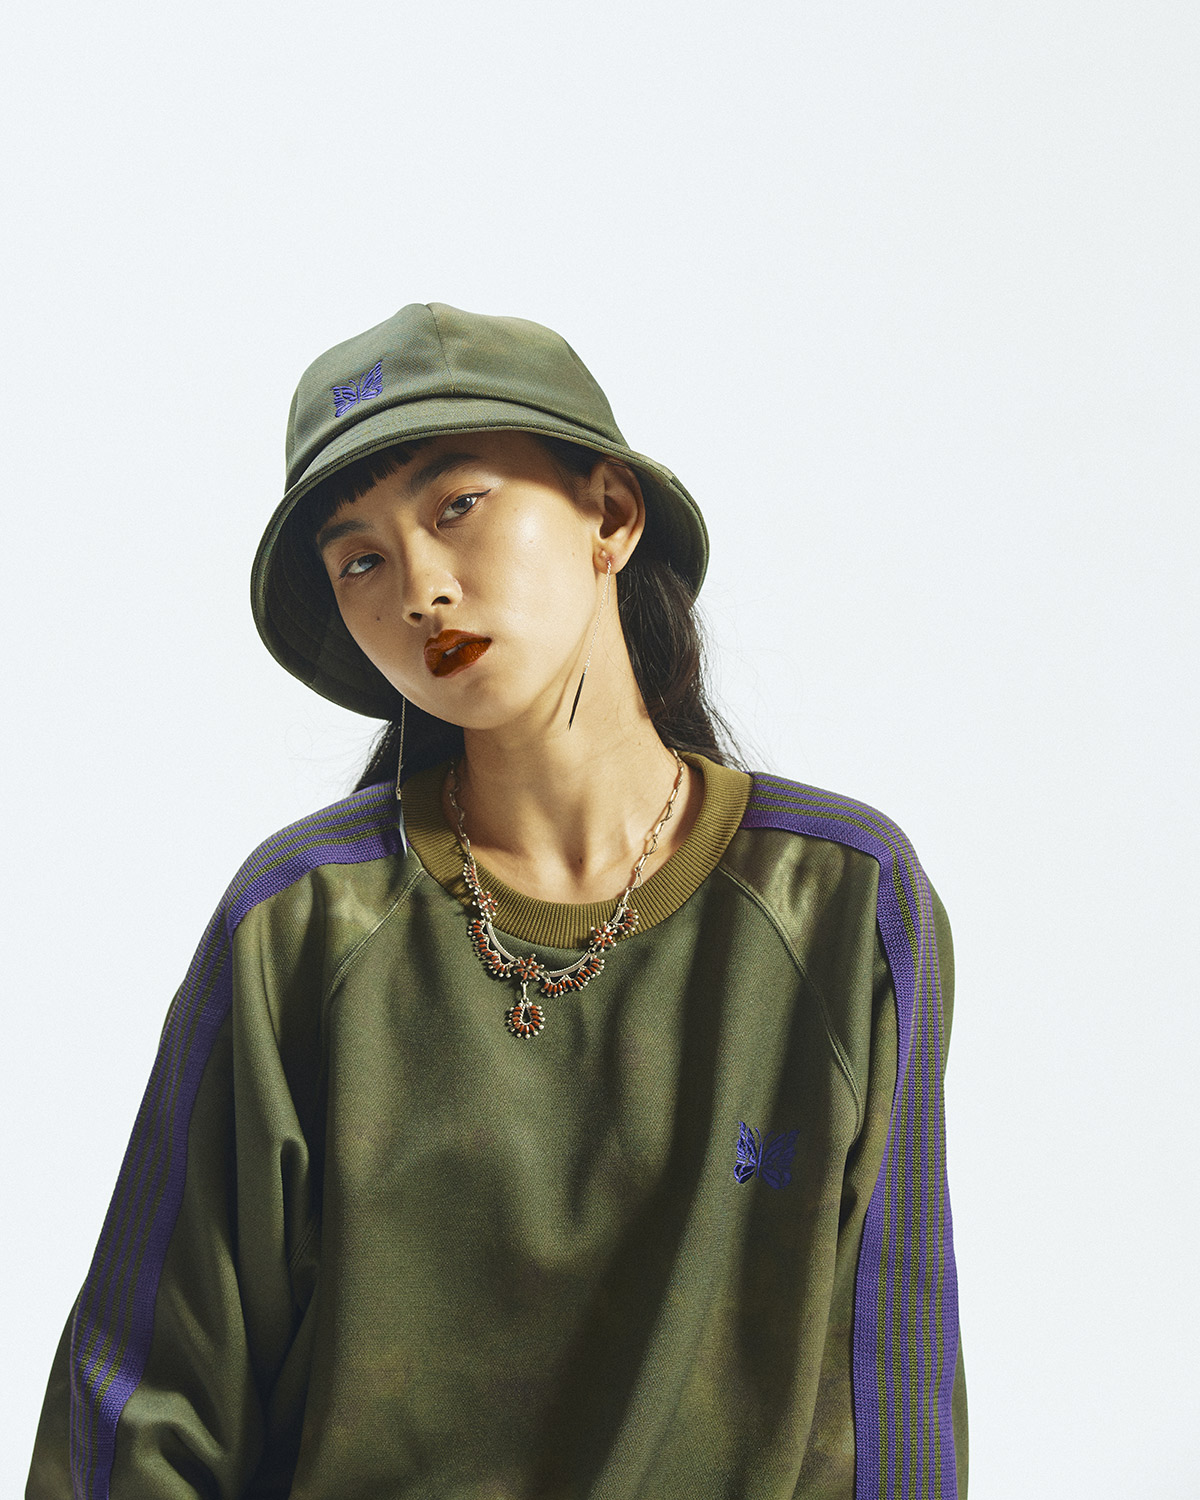 〈NEEDLES〉TRACK SUITS PRINTED UNEVEN DYE for NEPENTHES | WOMENS